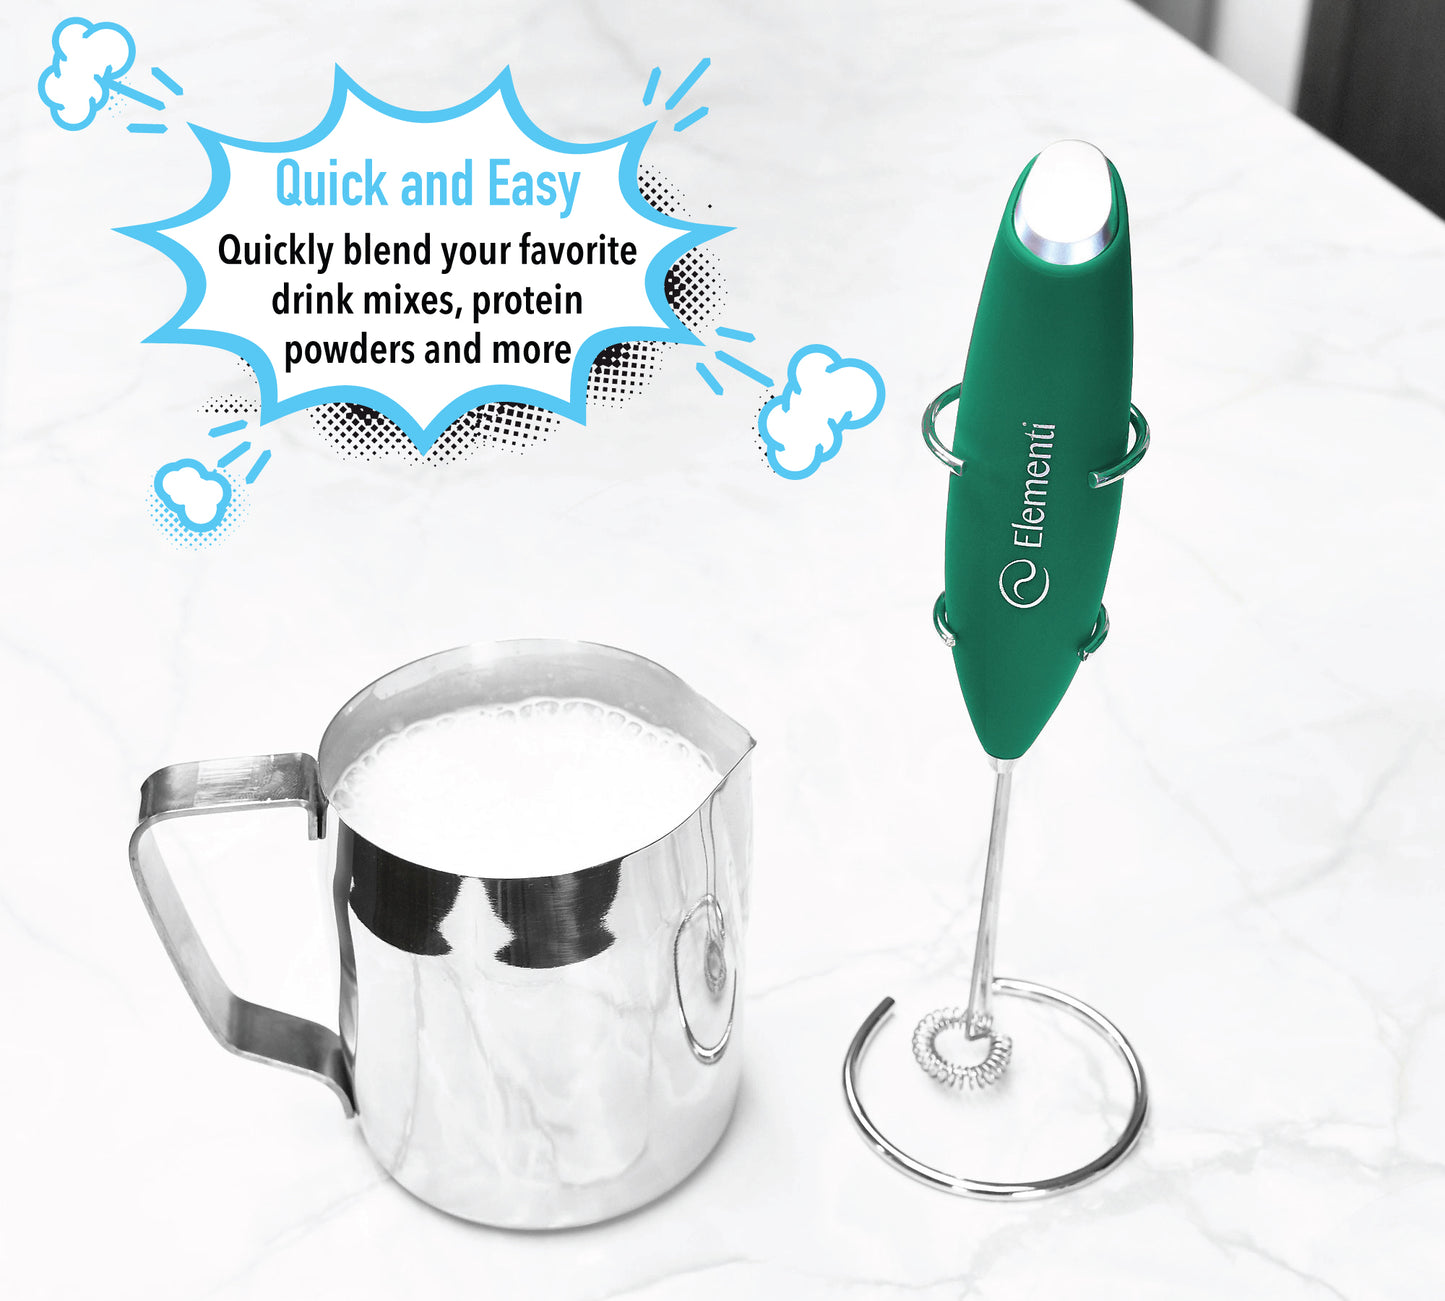 Elementi Electric Milk Frother Handheld (Emerald Green)